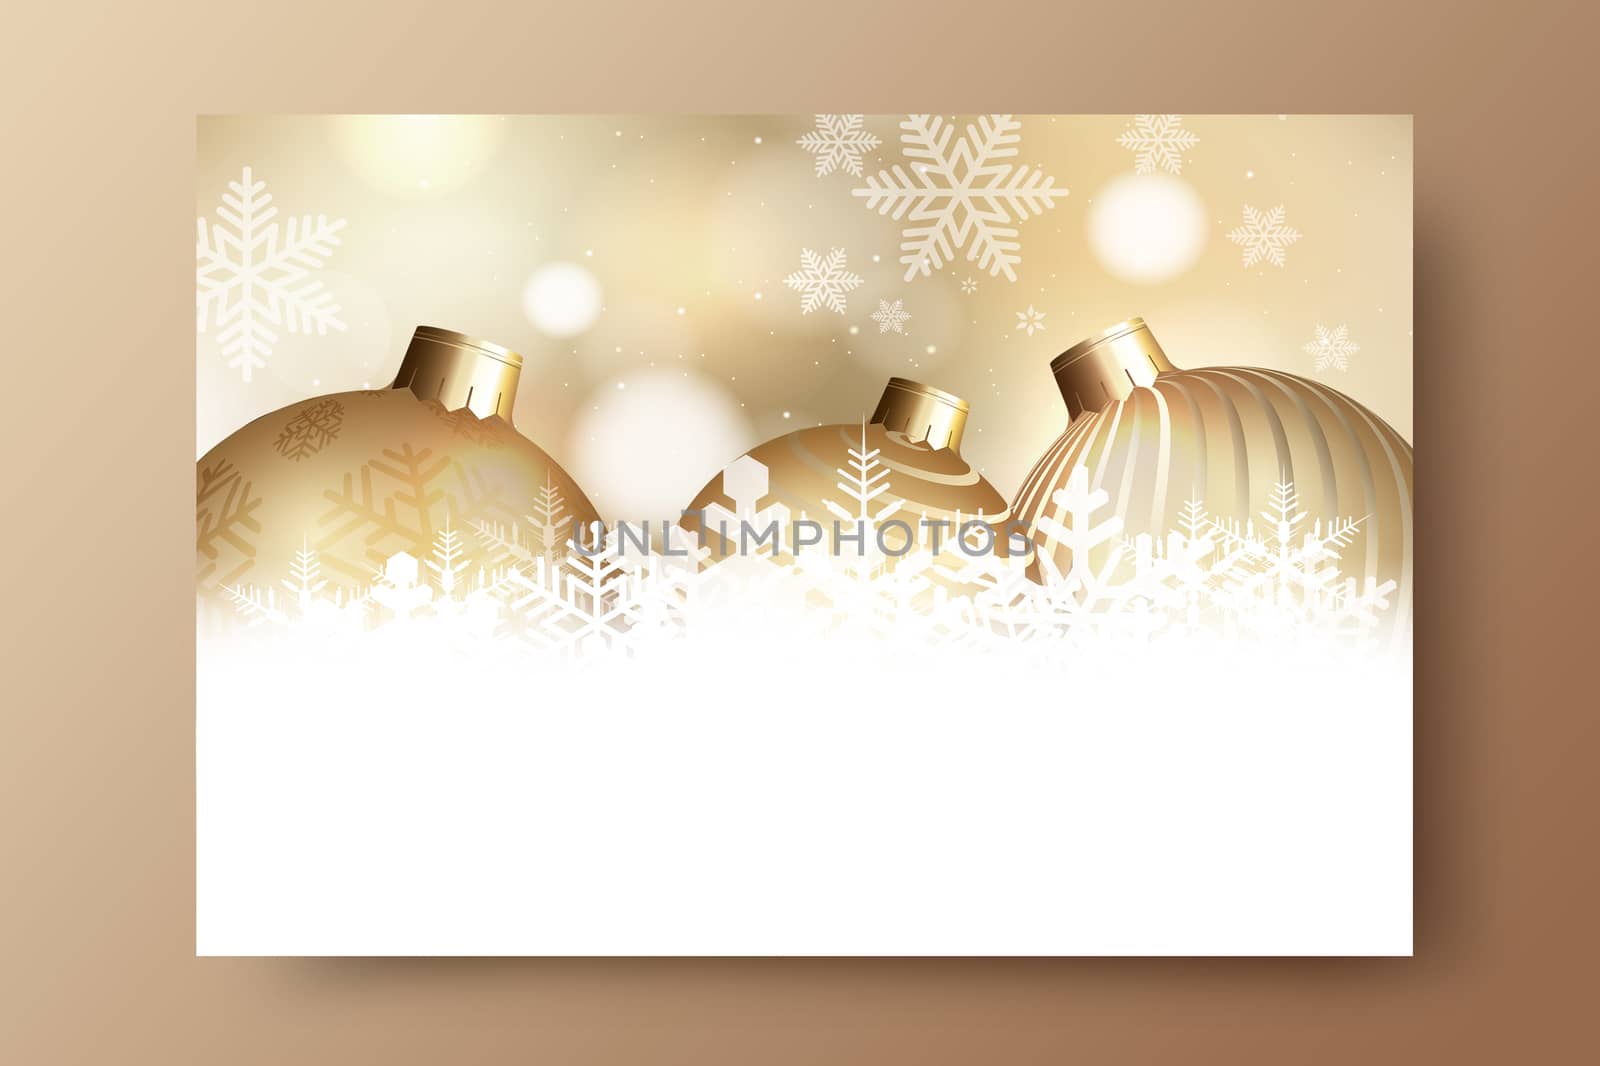 The Christmas ball decoration, snowflake and golden bokeh background